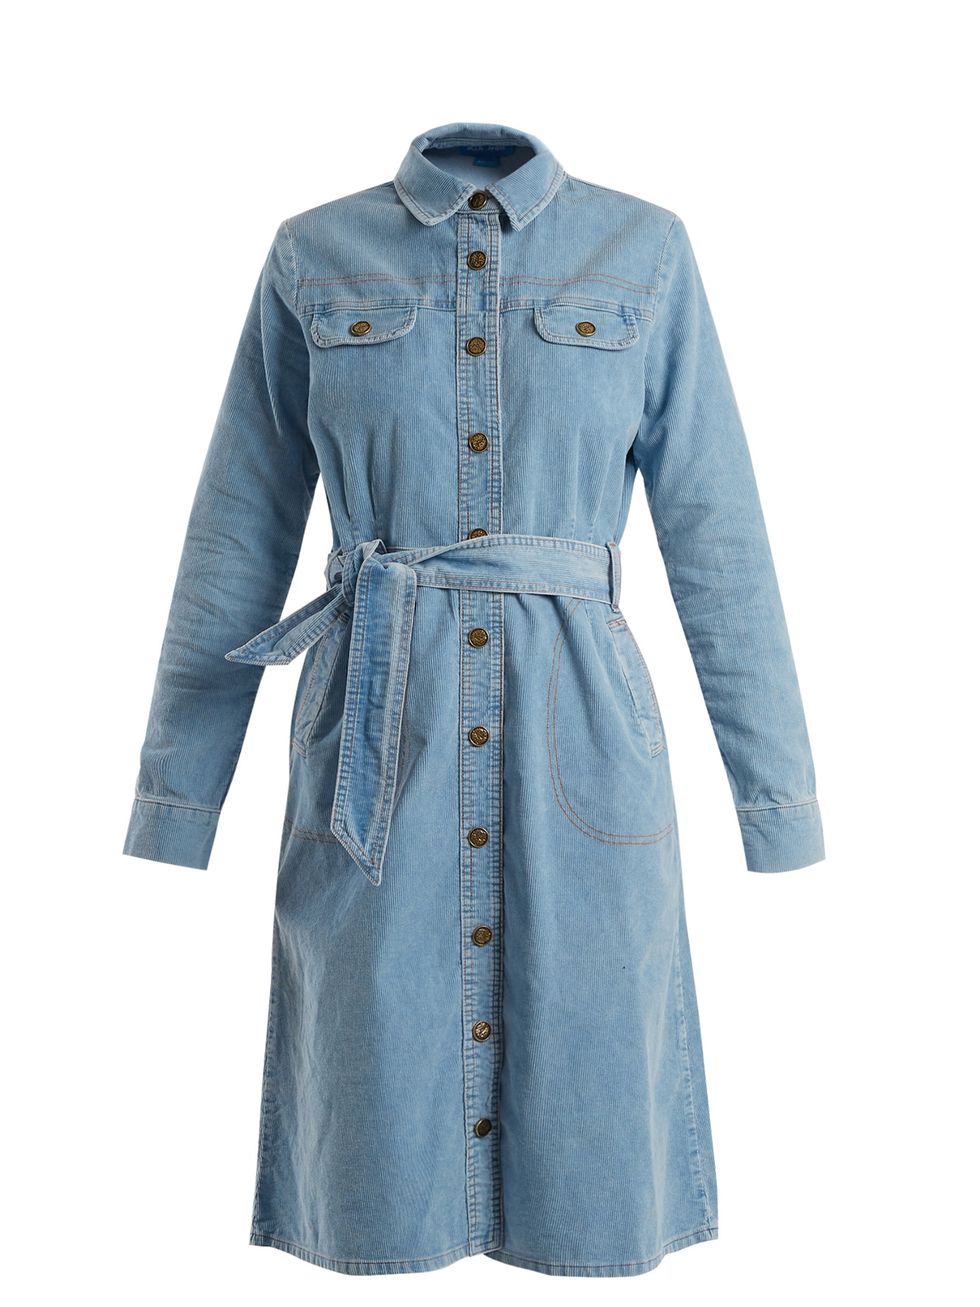 Clothing, Denim, Jeans, Outerwear, Sleeve, Coat, Trench coat, Textile, Dress, Day dress, 